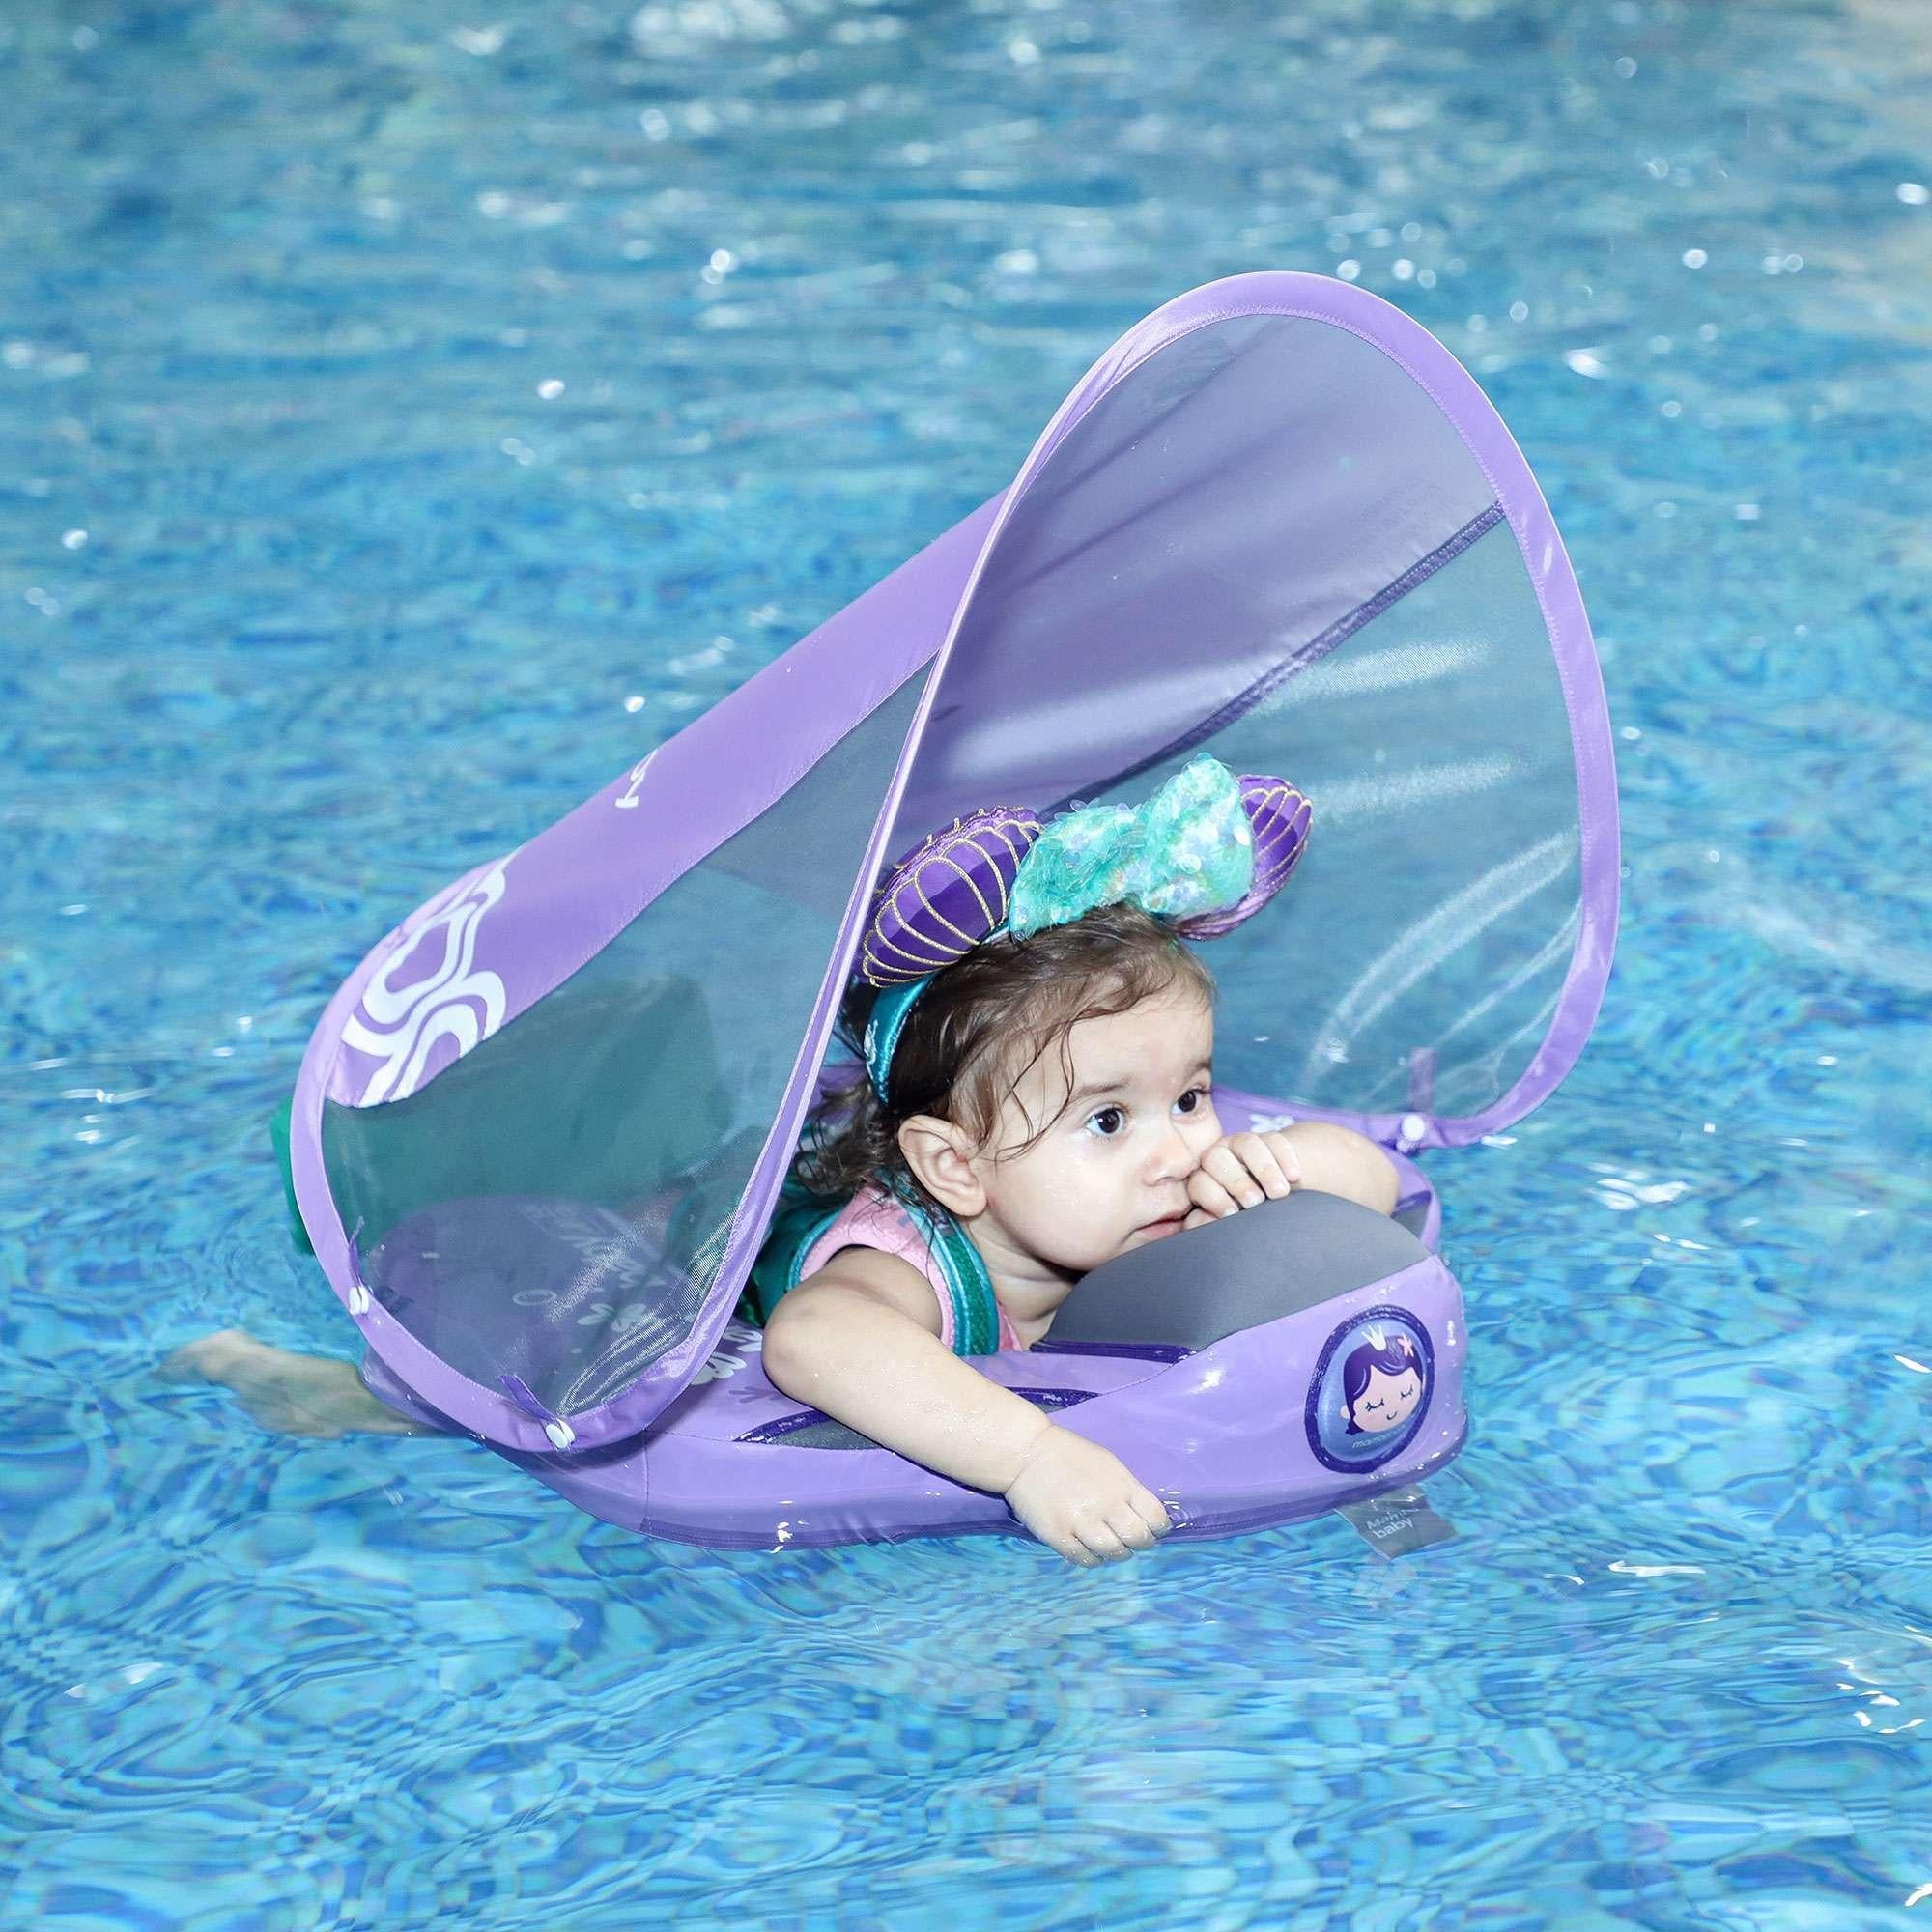 How to Select Best HECCEI Mambobaby Float for Your Baby?